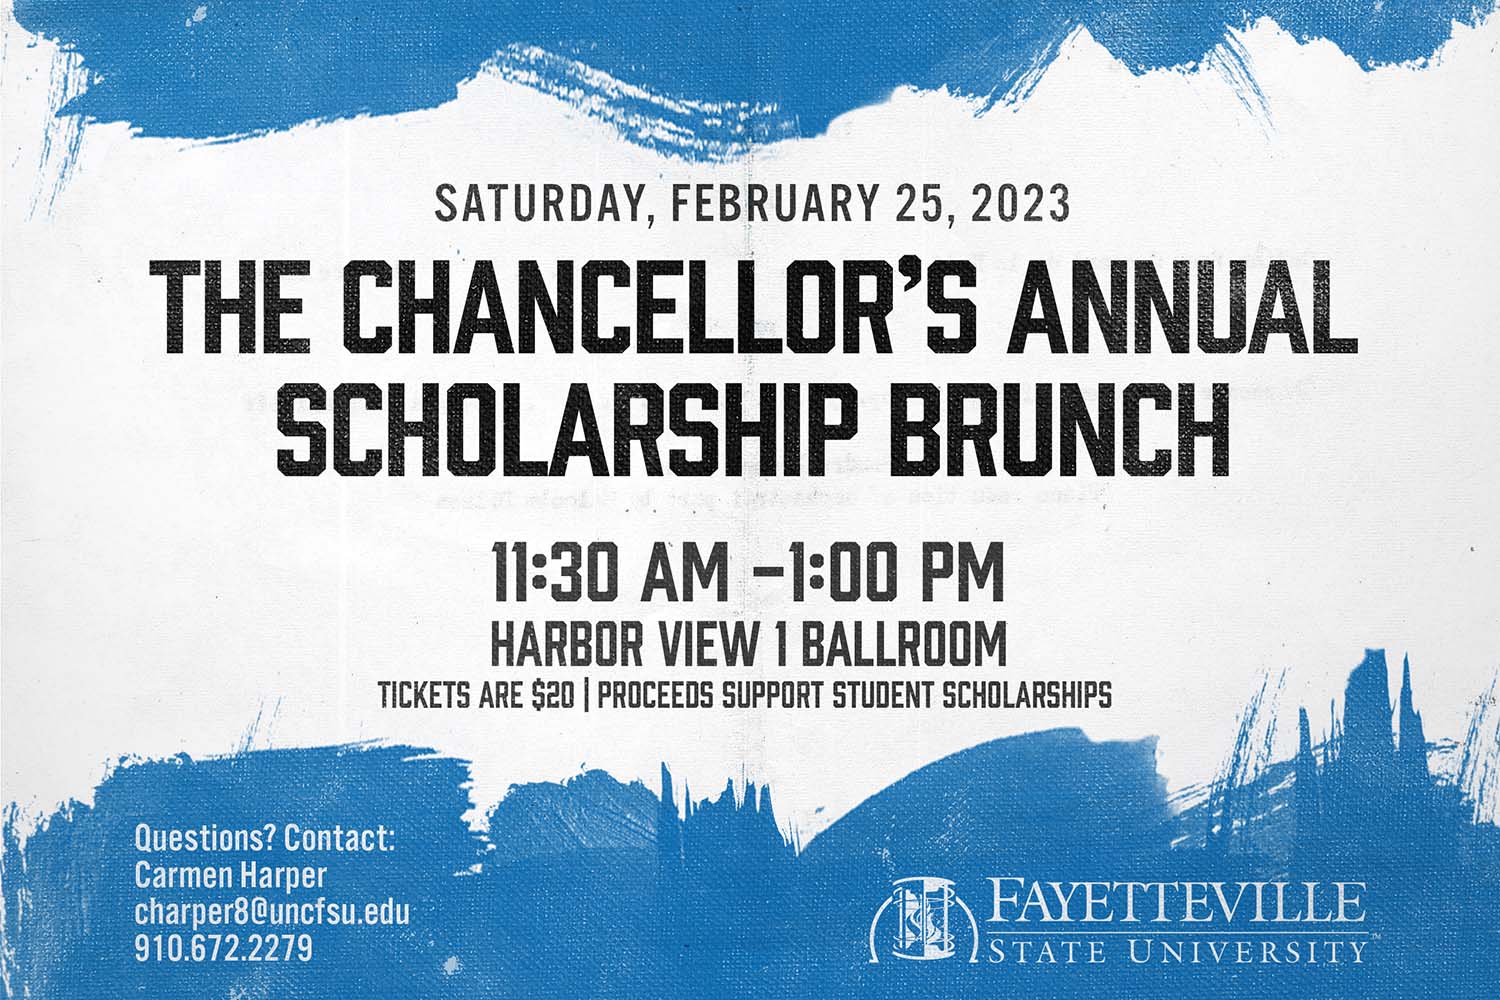 The Chancellor’s Annual Scholarship Brunch